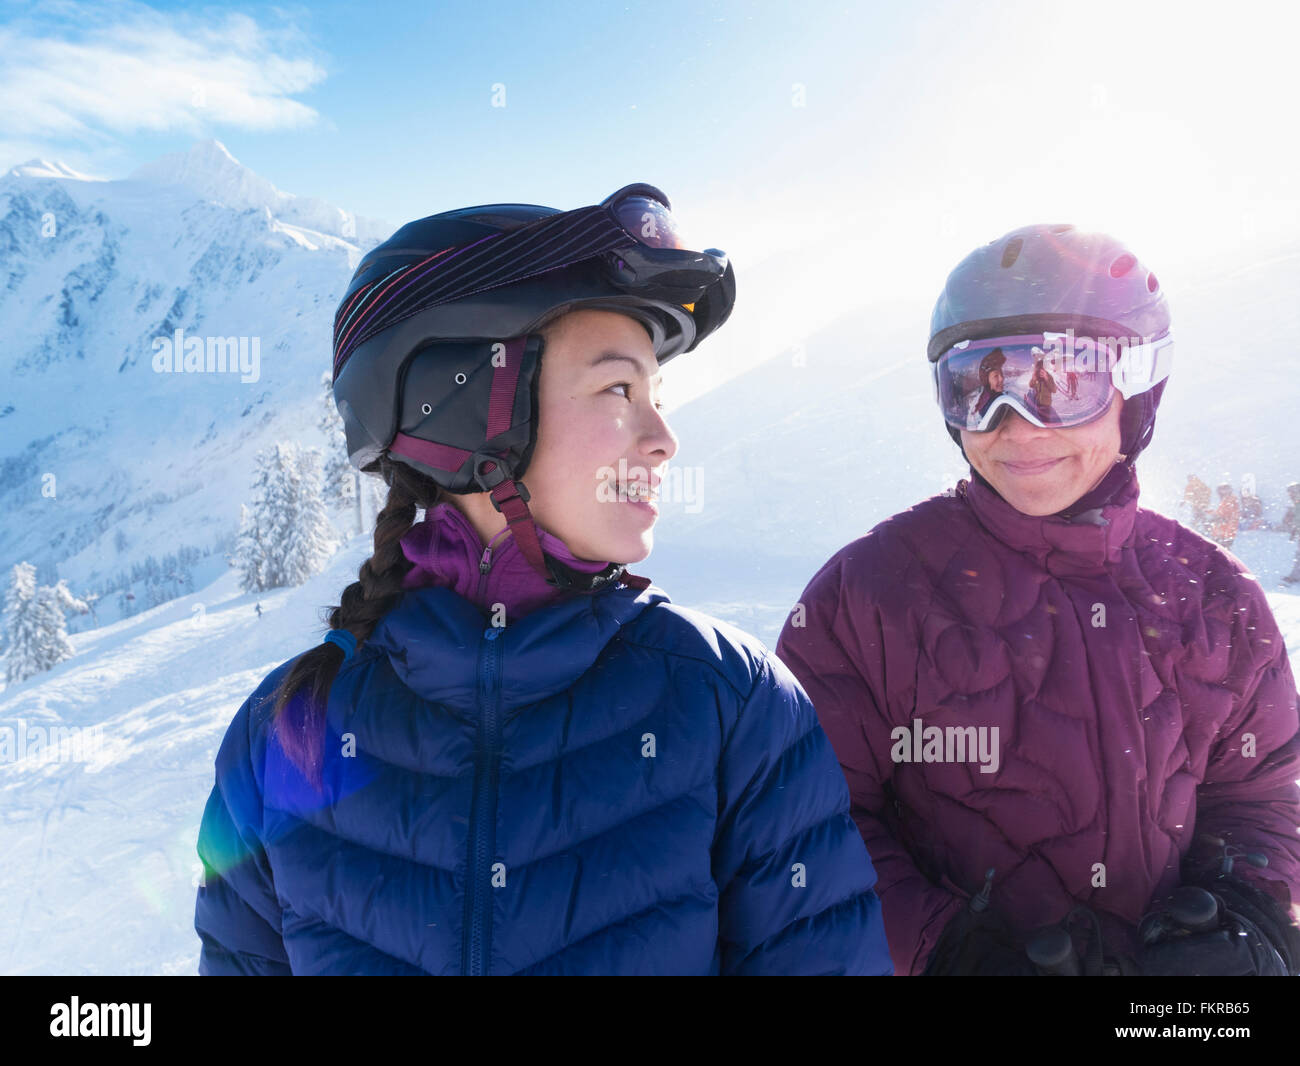 Mother and daughter wearing ski gear on snowy mountain Stock Photo